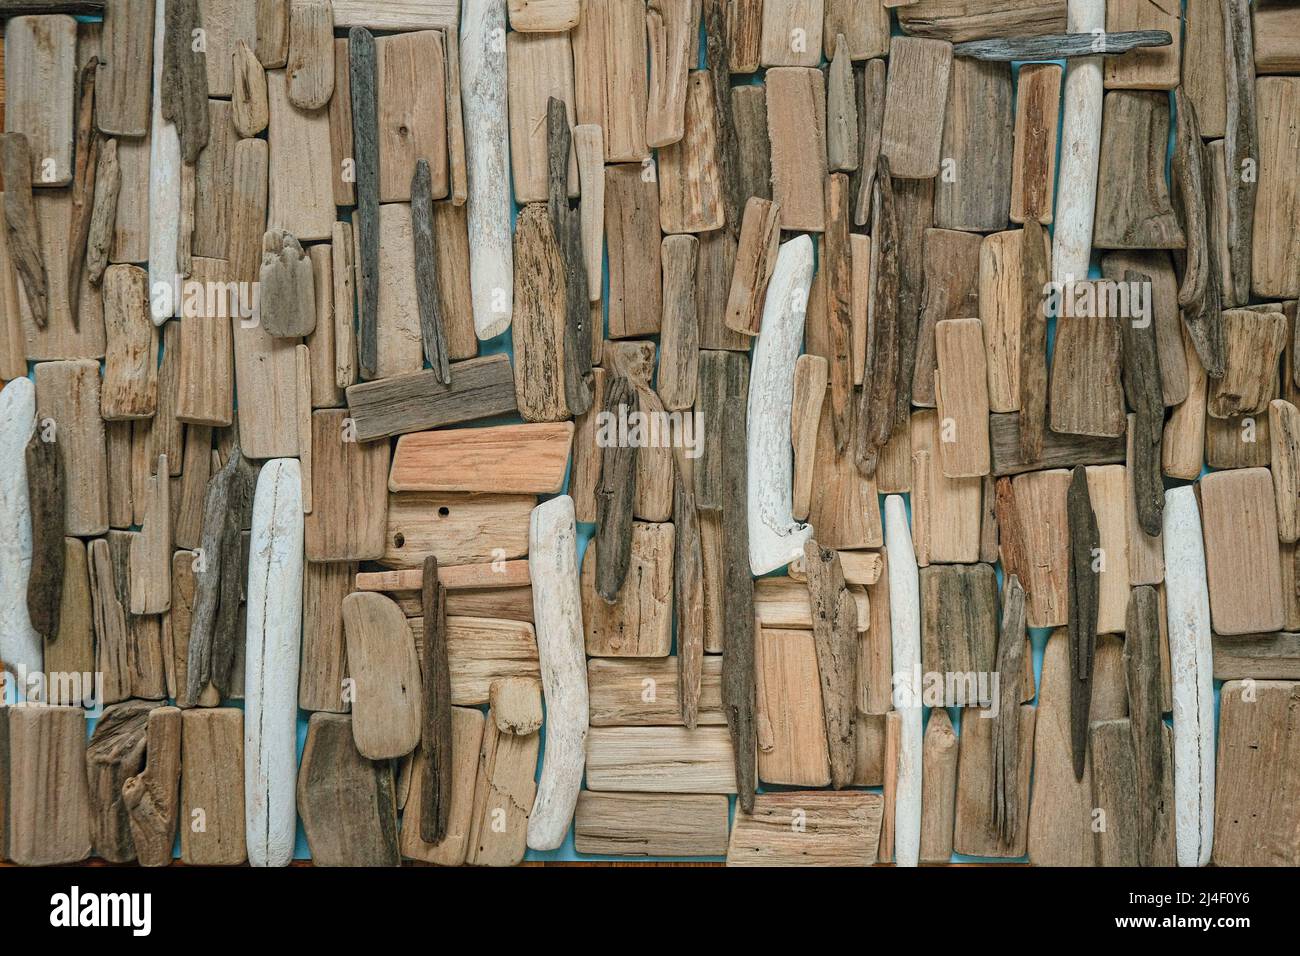 Il mare si snags su sfondo blu. driftwood Wall.Grey and Brown SEA Driftwood texture.Driftwood background.Natural wood decor in uno stile nautico. Foto Stock